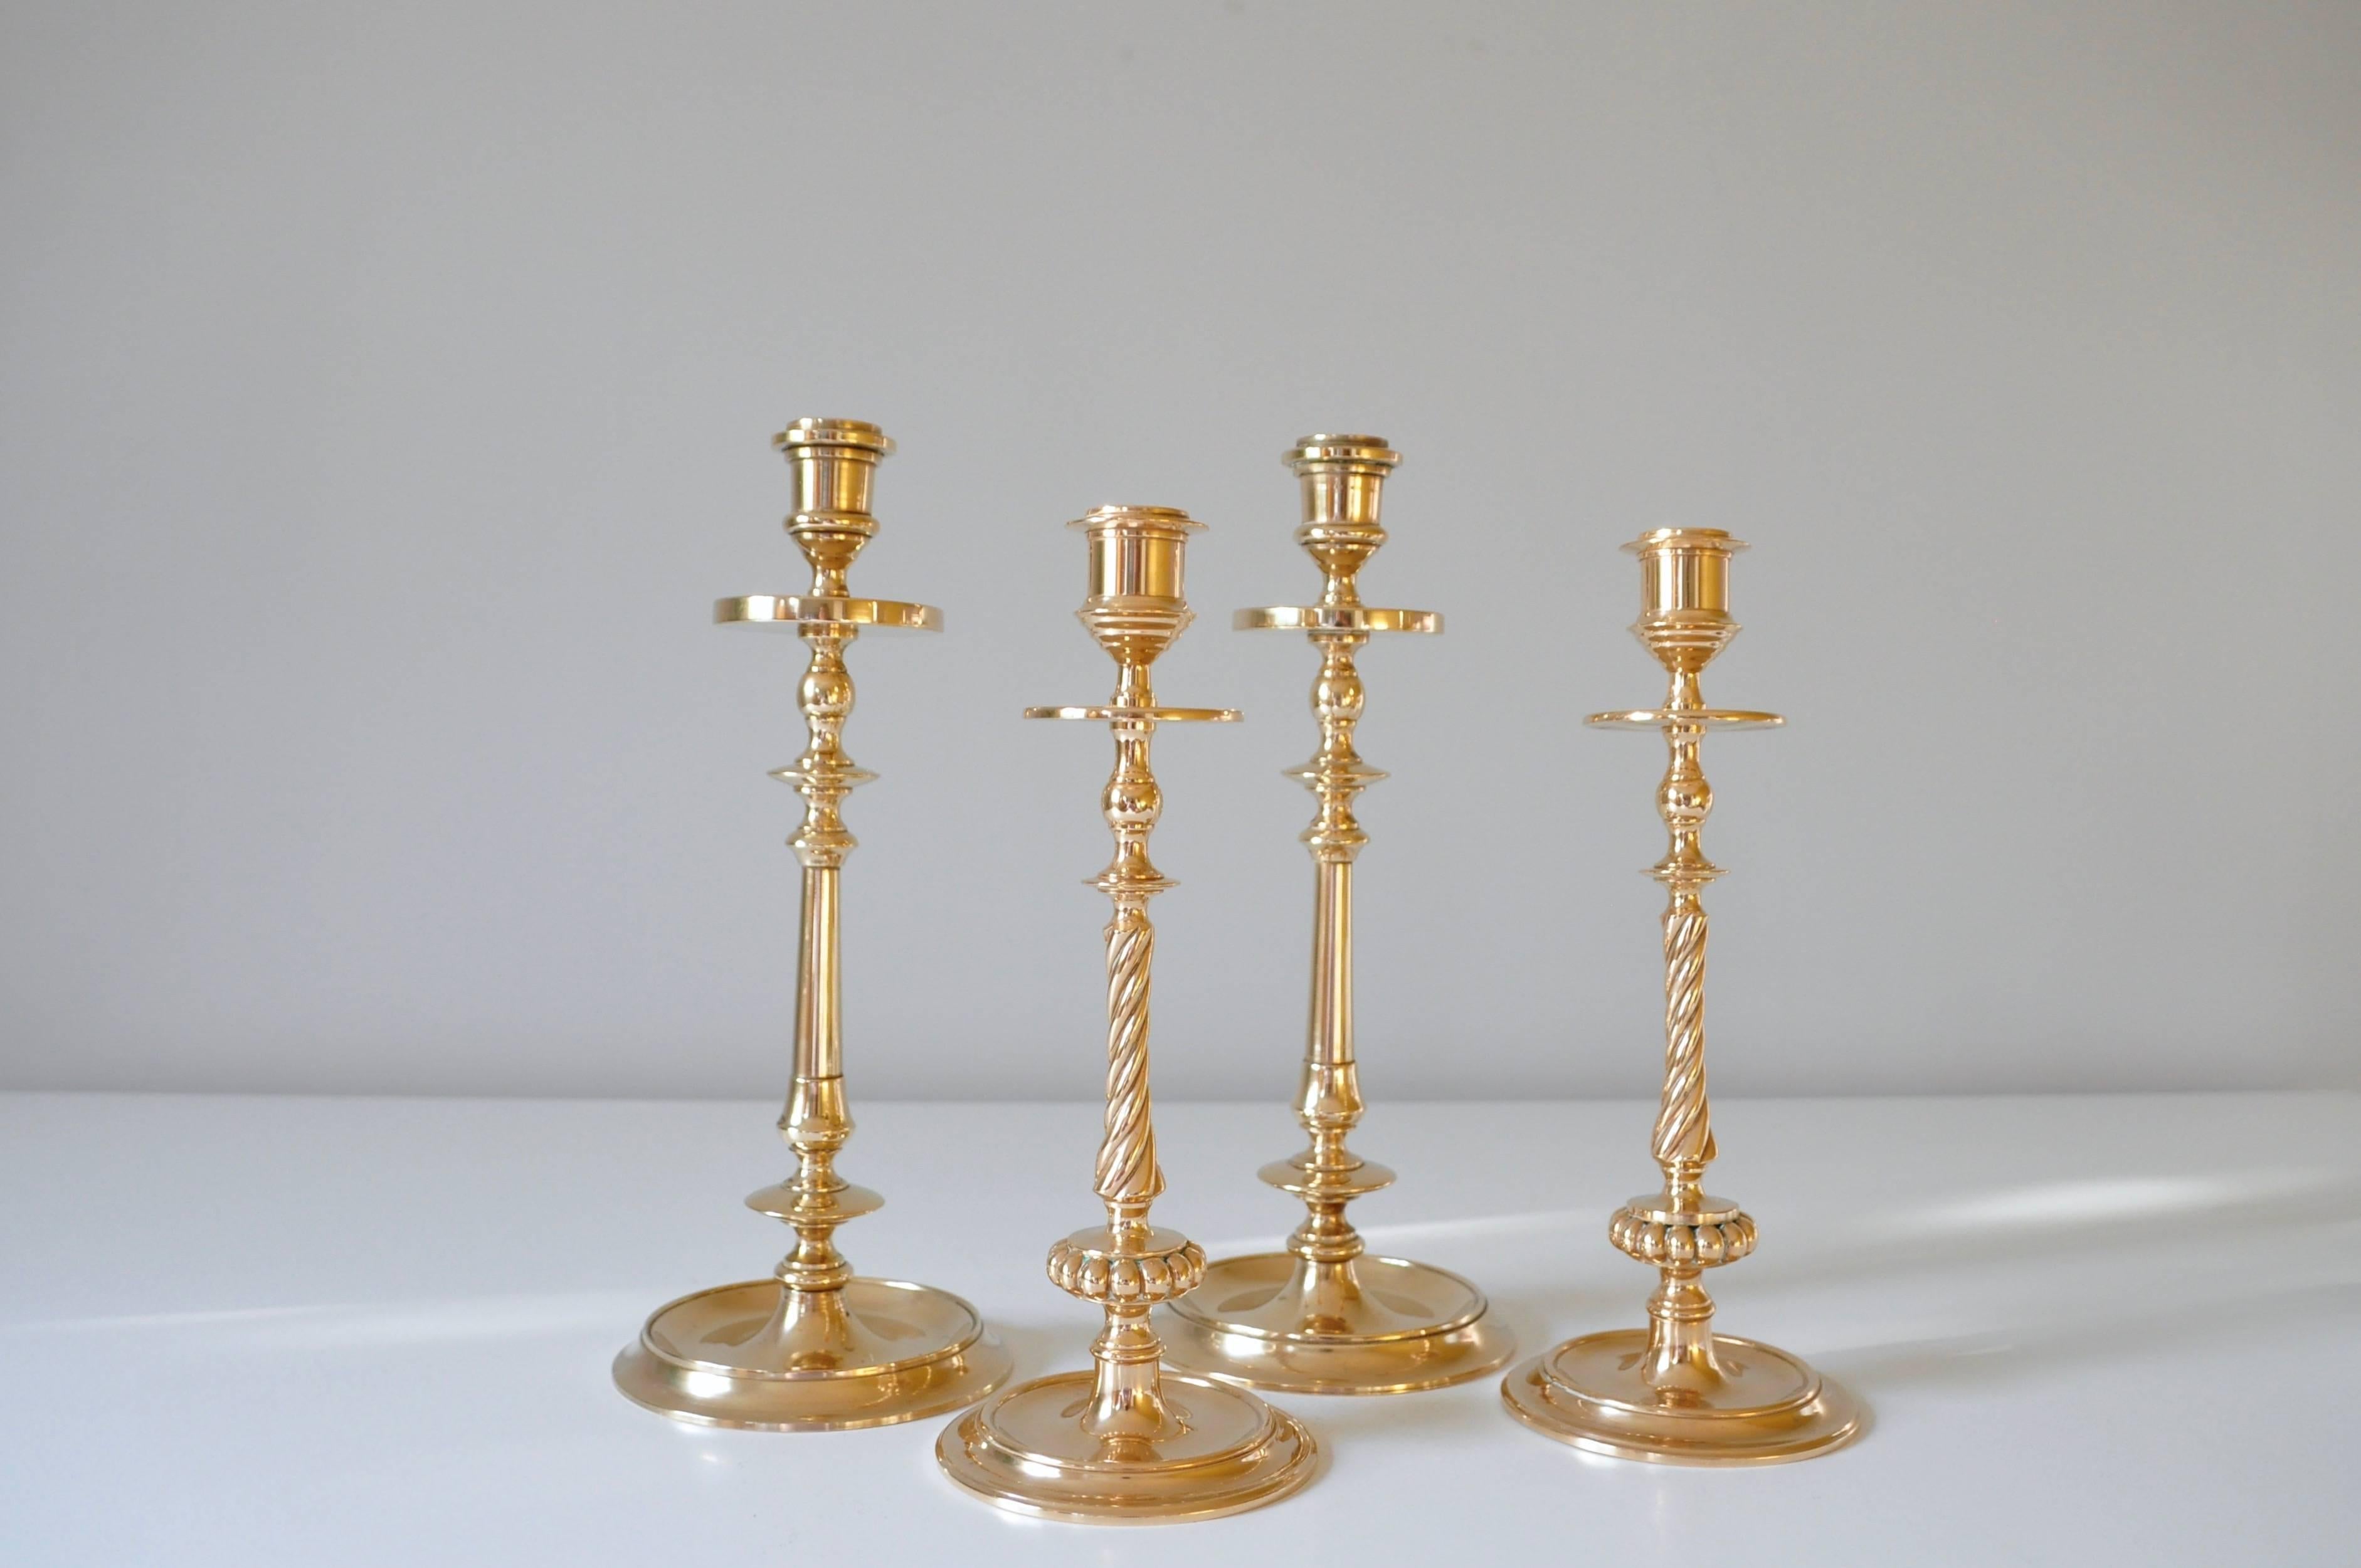 This beautiful set includes ten Art Deco candleholders made in Denmark & Sweden. 
They are made of solid brass and in very nice condition with small signs of use. 

The sizes are: 

Two x 27cm height
Two x 26cm height
Two x 23.5cm height
Two